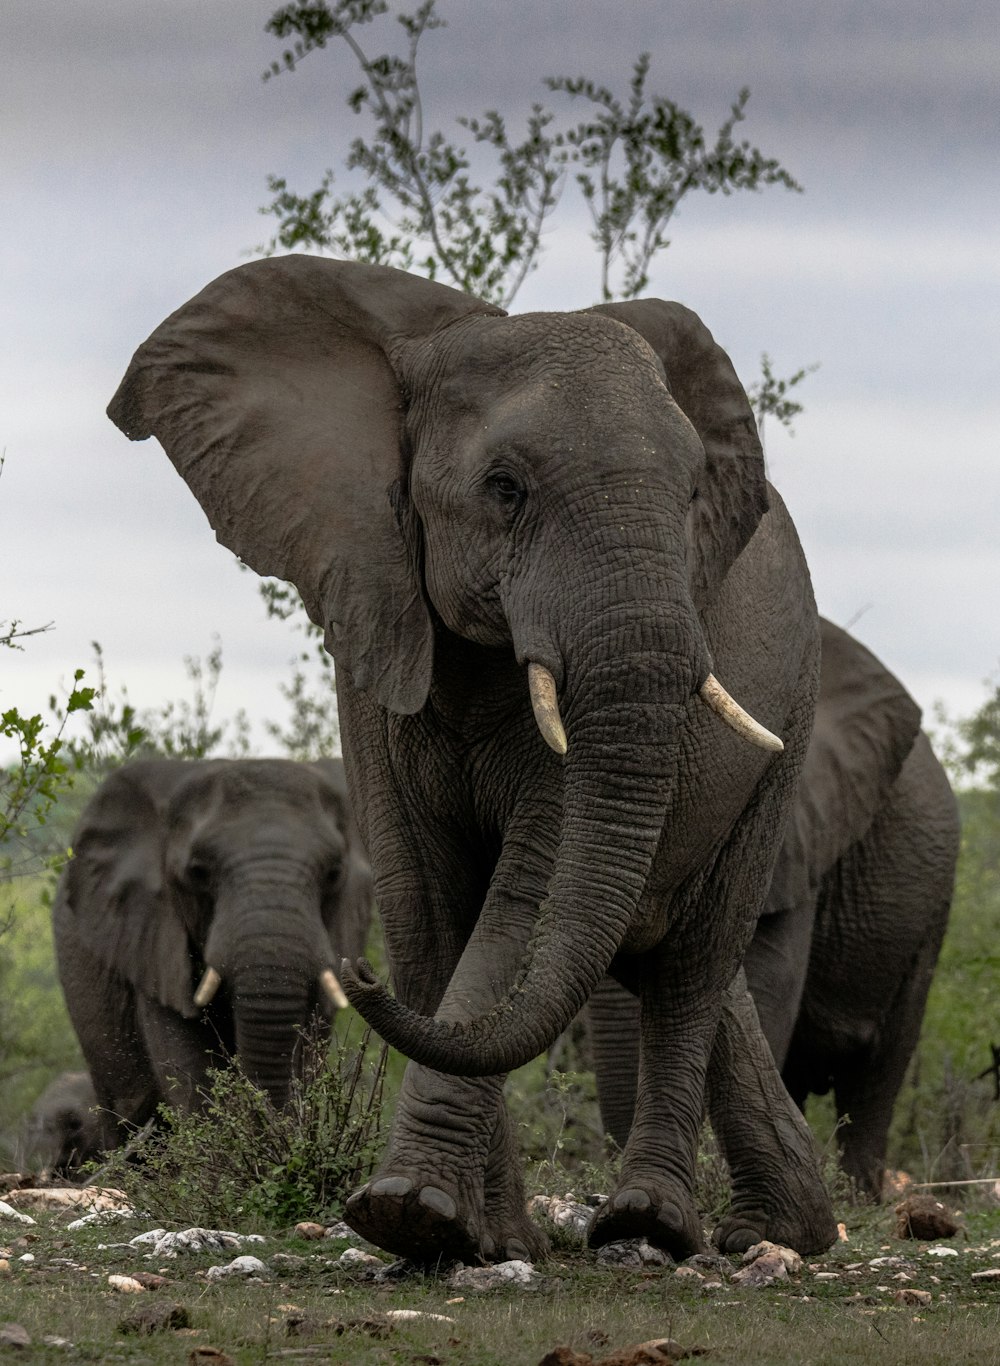 a couple of elephants that are standing in the grass